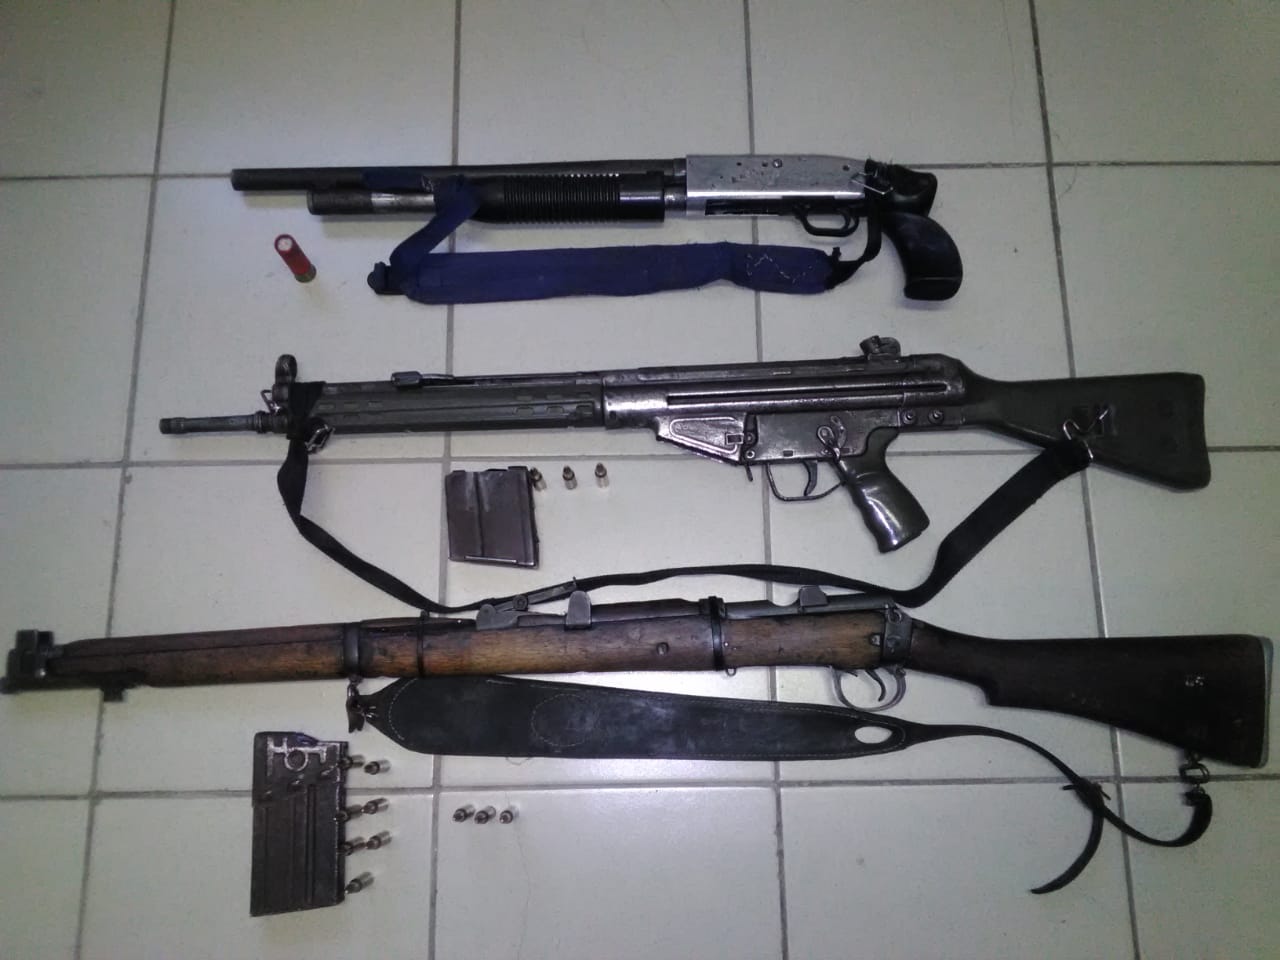 Brothers among those nabbed with illegal firearms